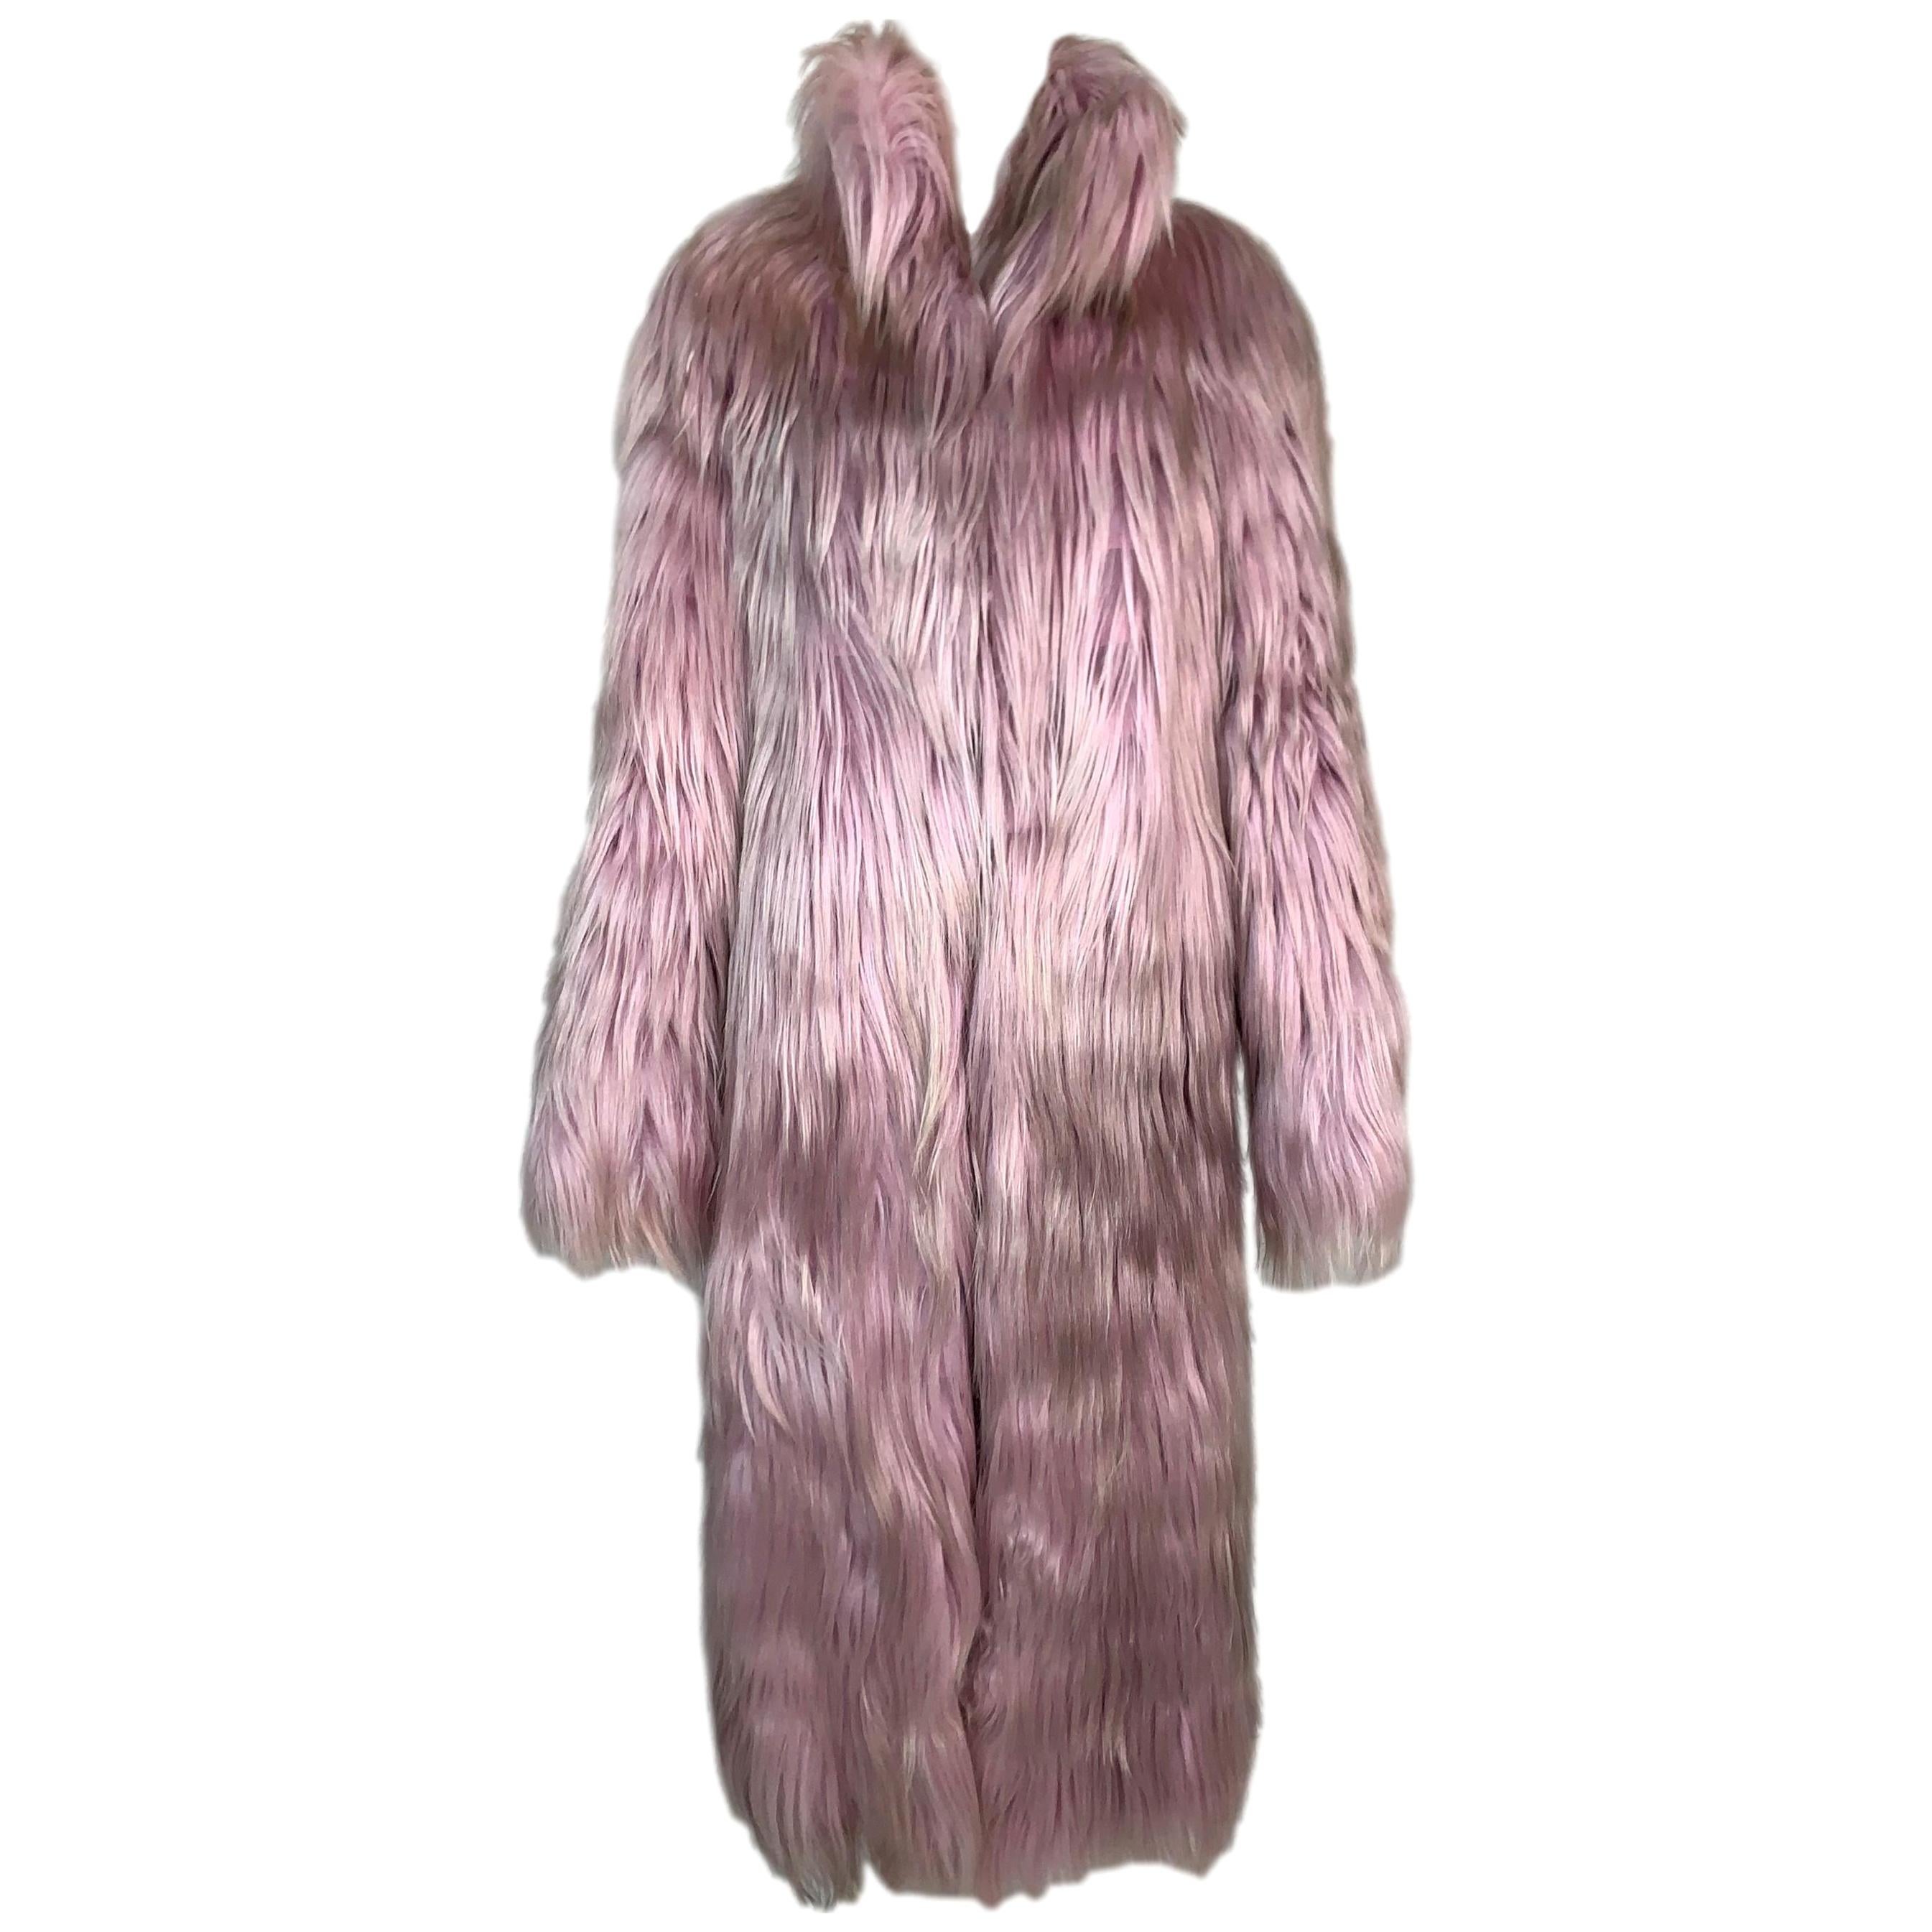 F/W 2001 Gucci by Tom Ford Runway Pink & Blonde Long Fur Coat